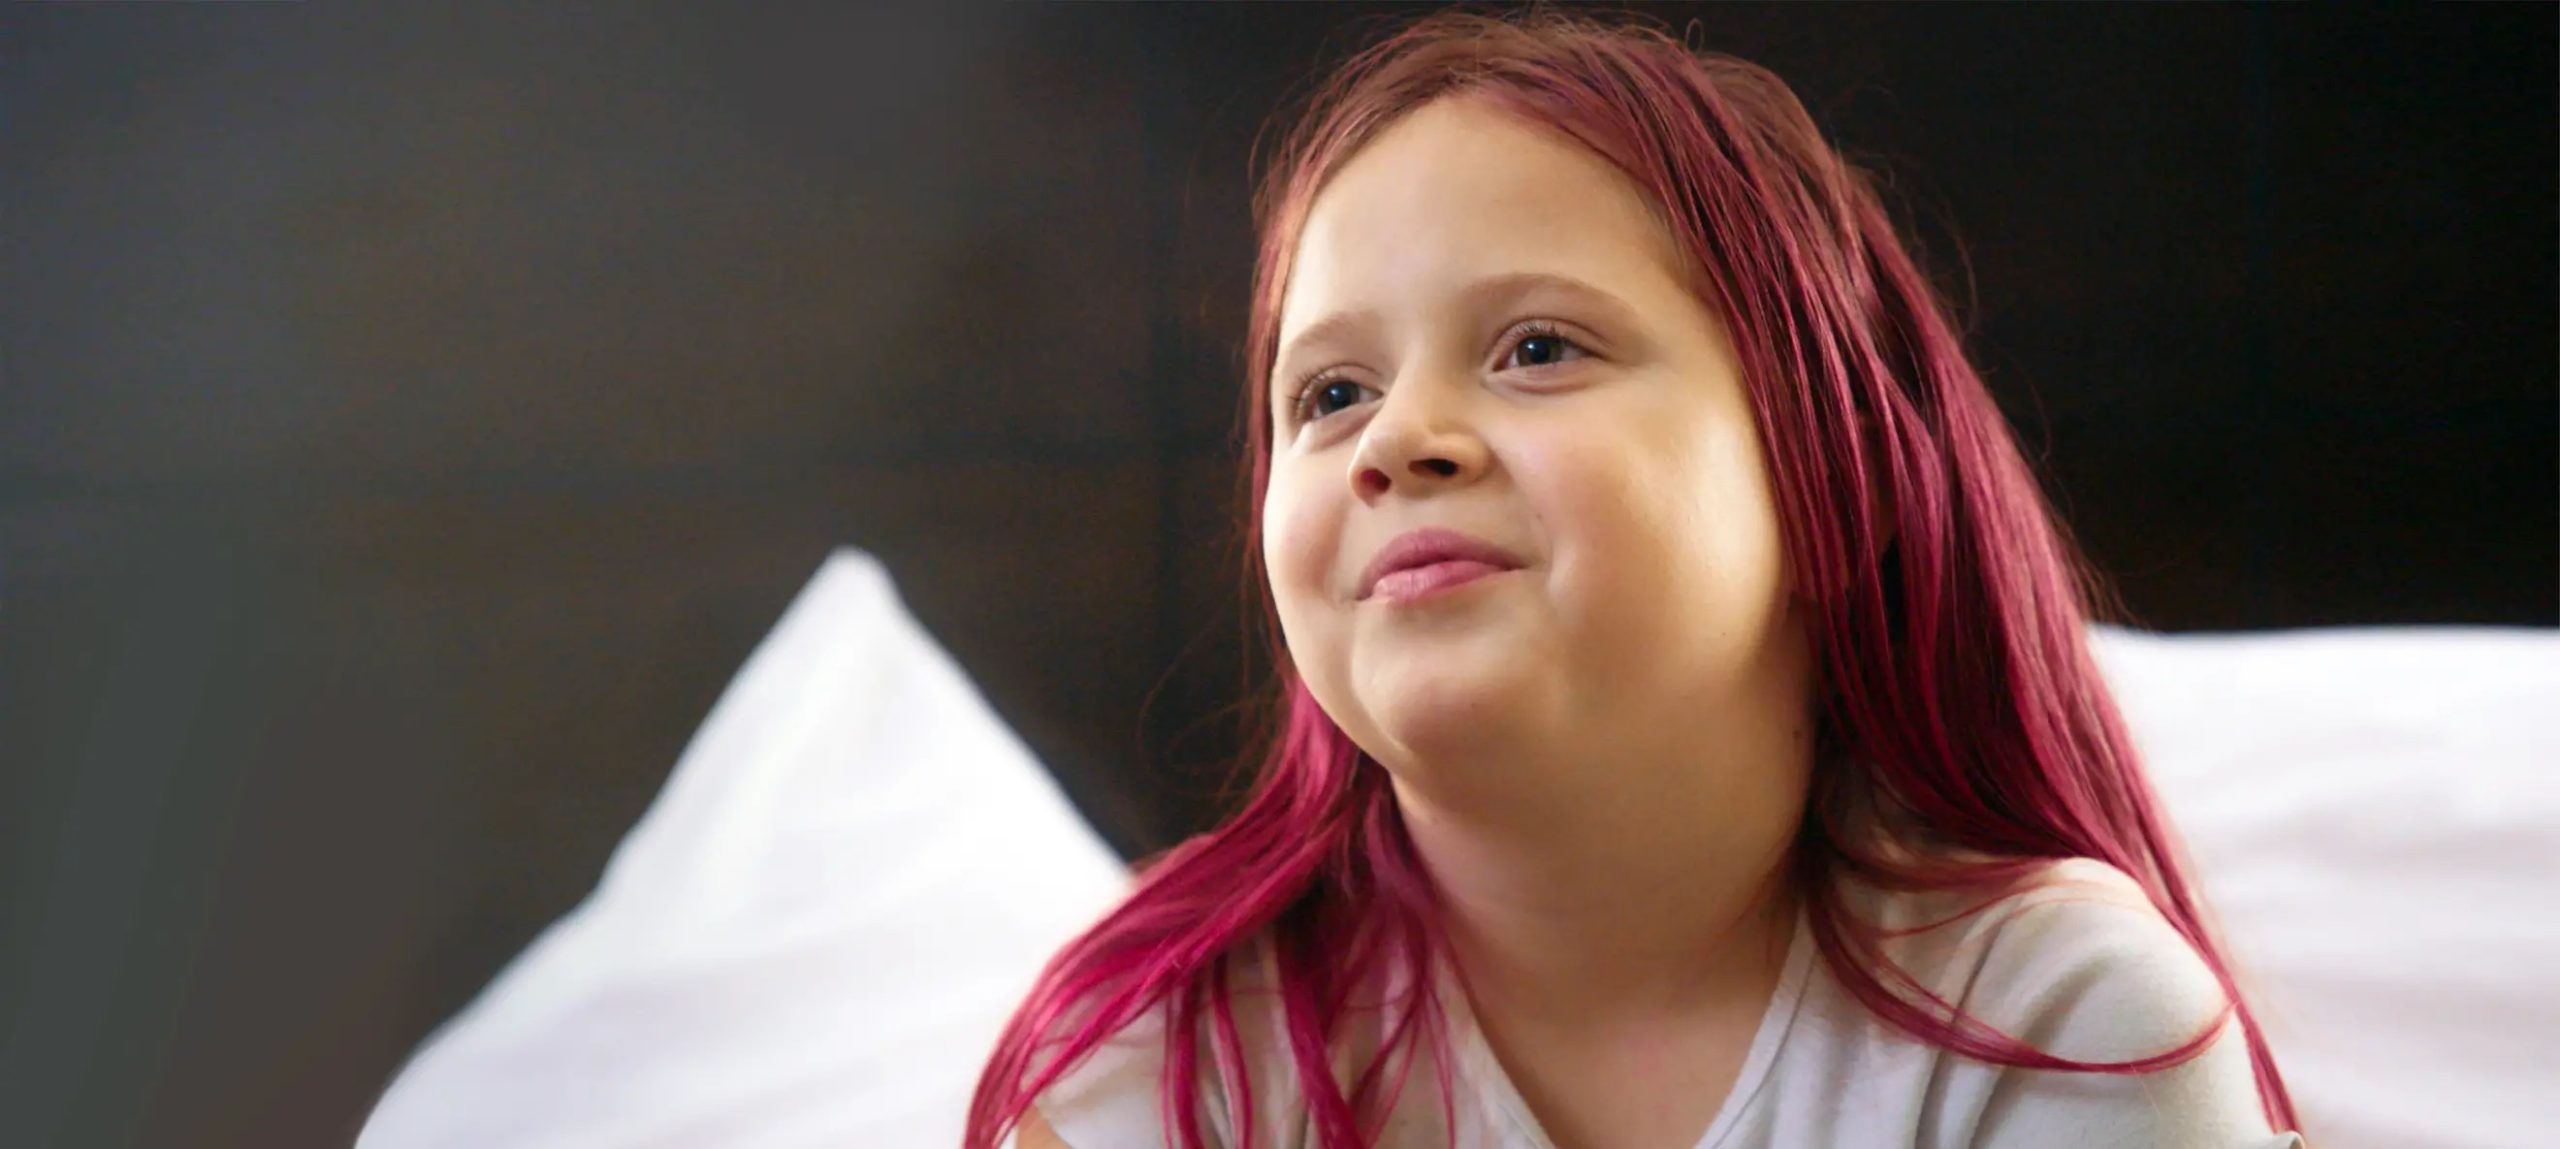 A young girl with red hair smiles and looks up and in the distance.